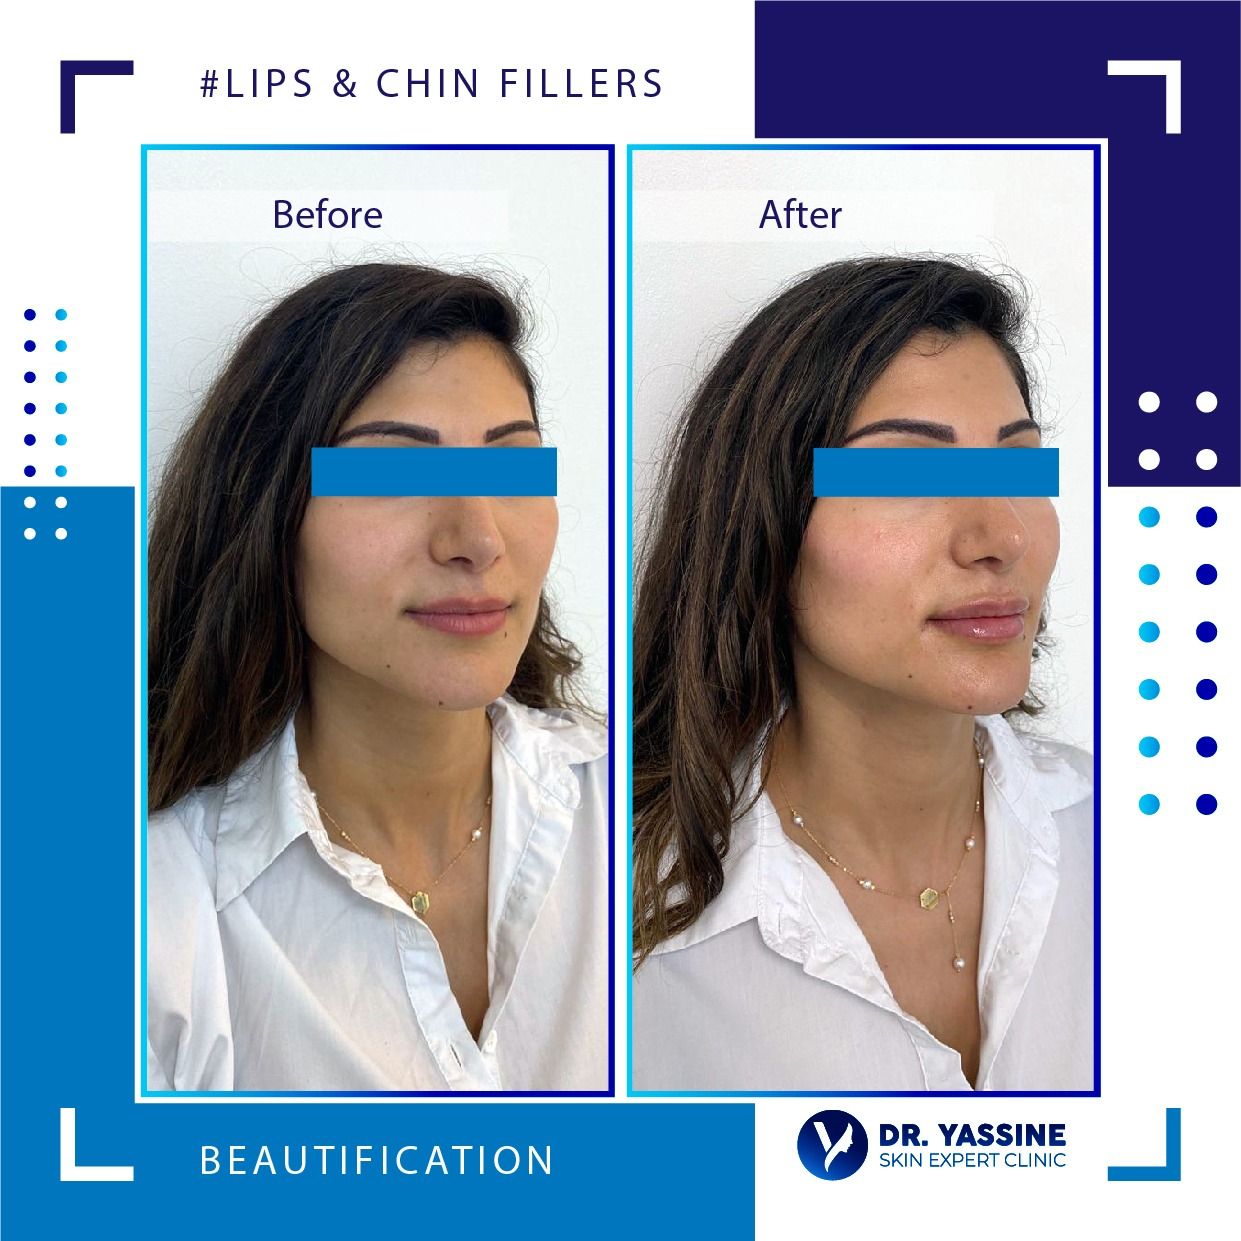 Lips & Chin fillers